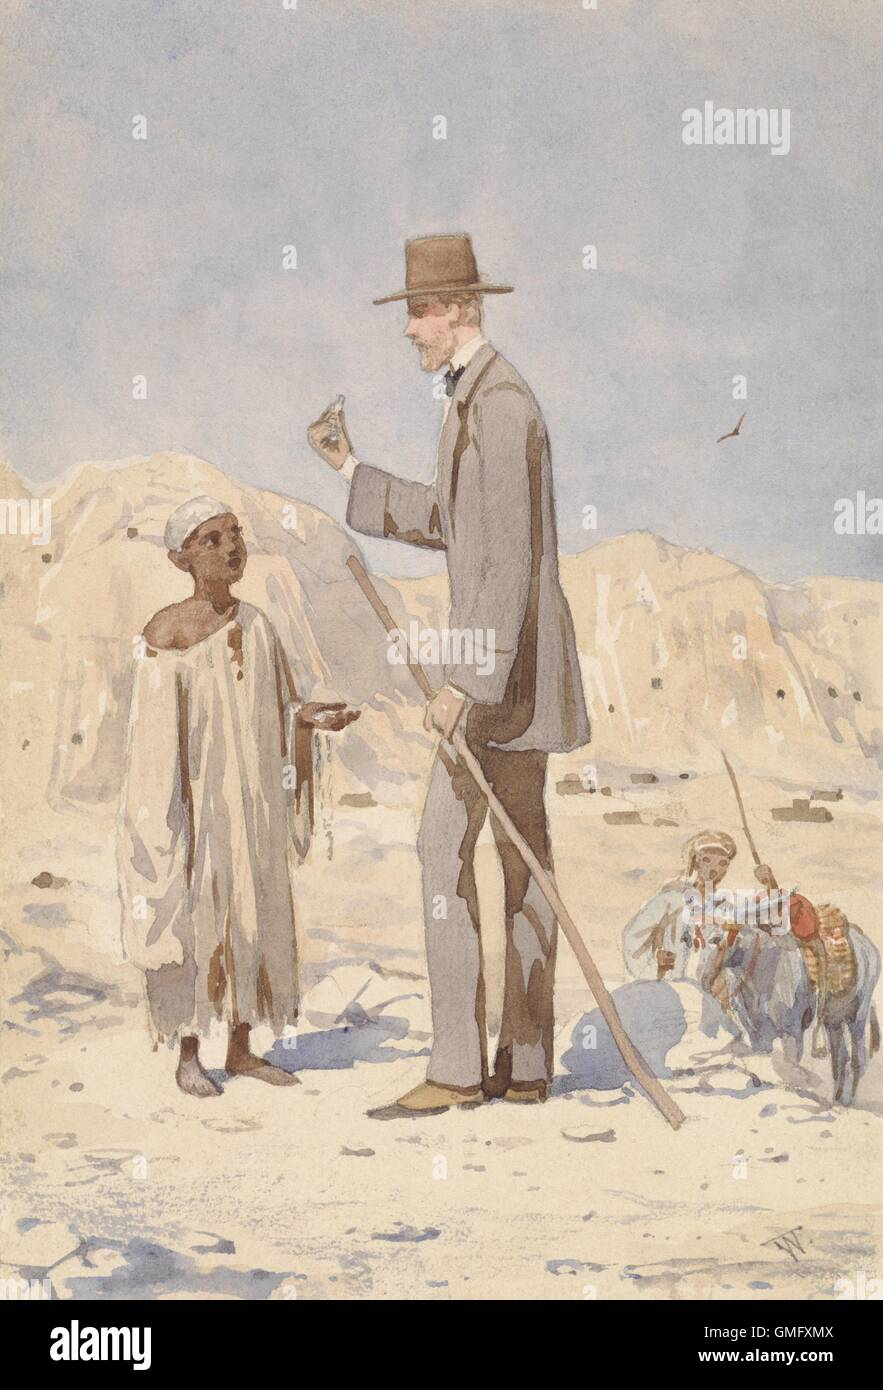 Louis Philippe Albert d'Orleans at an excavation in Egypt, by Willem de Famars Testas, 1860, Dutch watercolor painting. Also known as the Comte de Paris, he was a historian and journalist. Philippe volunteered to serve as a Union Army officer in the American Civil War (BSLOC 2016 2 263) Stock Photo